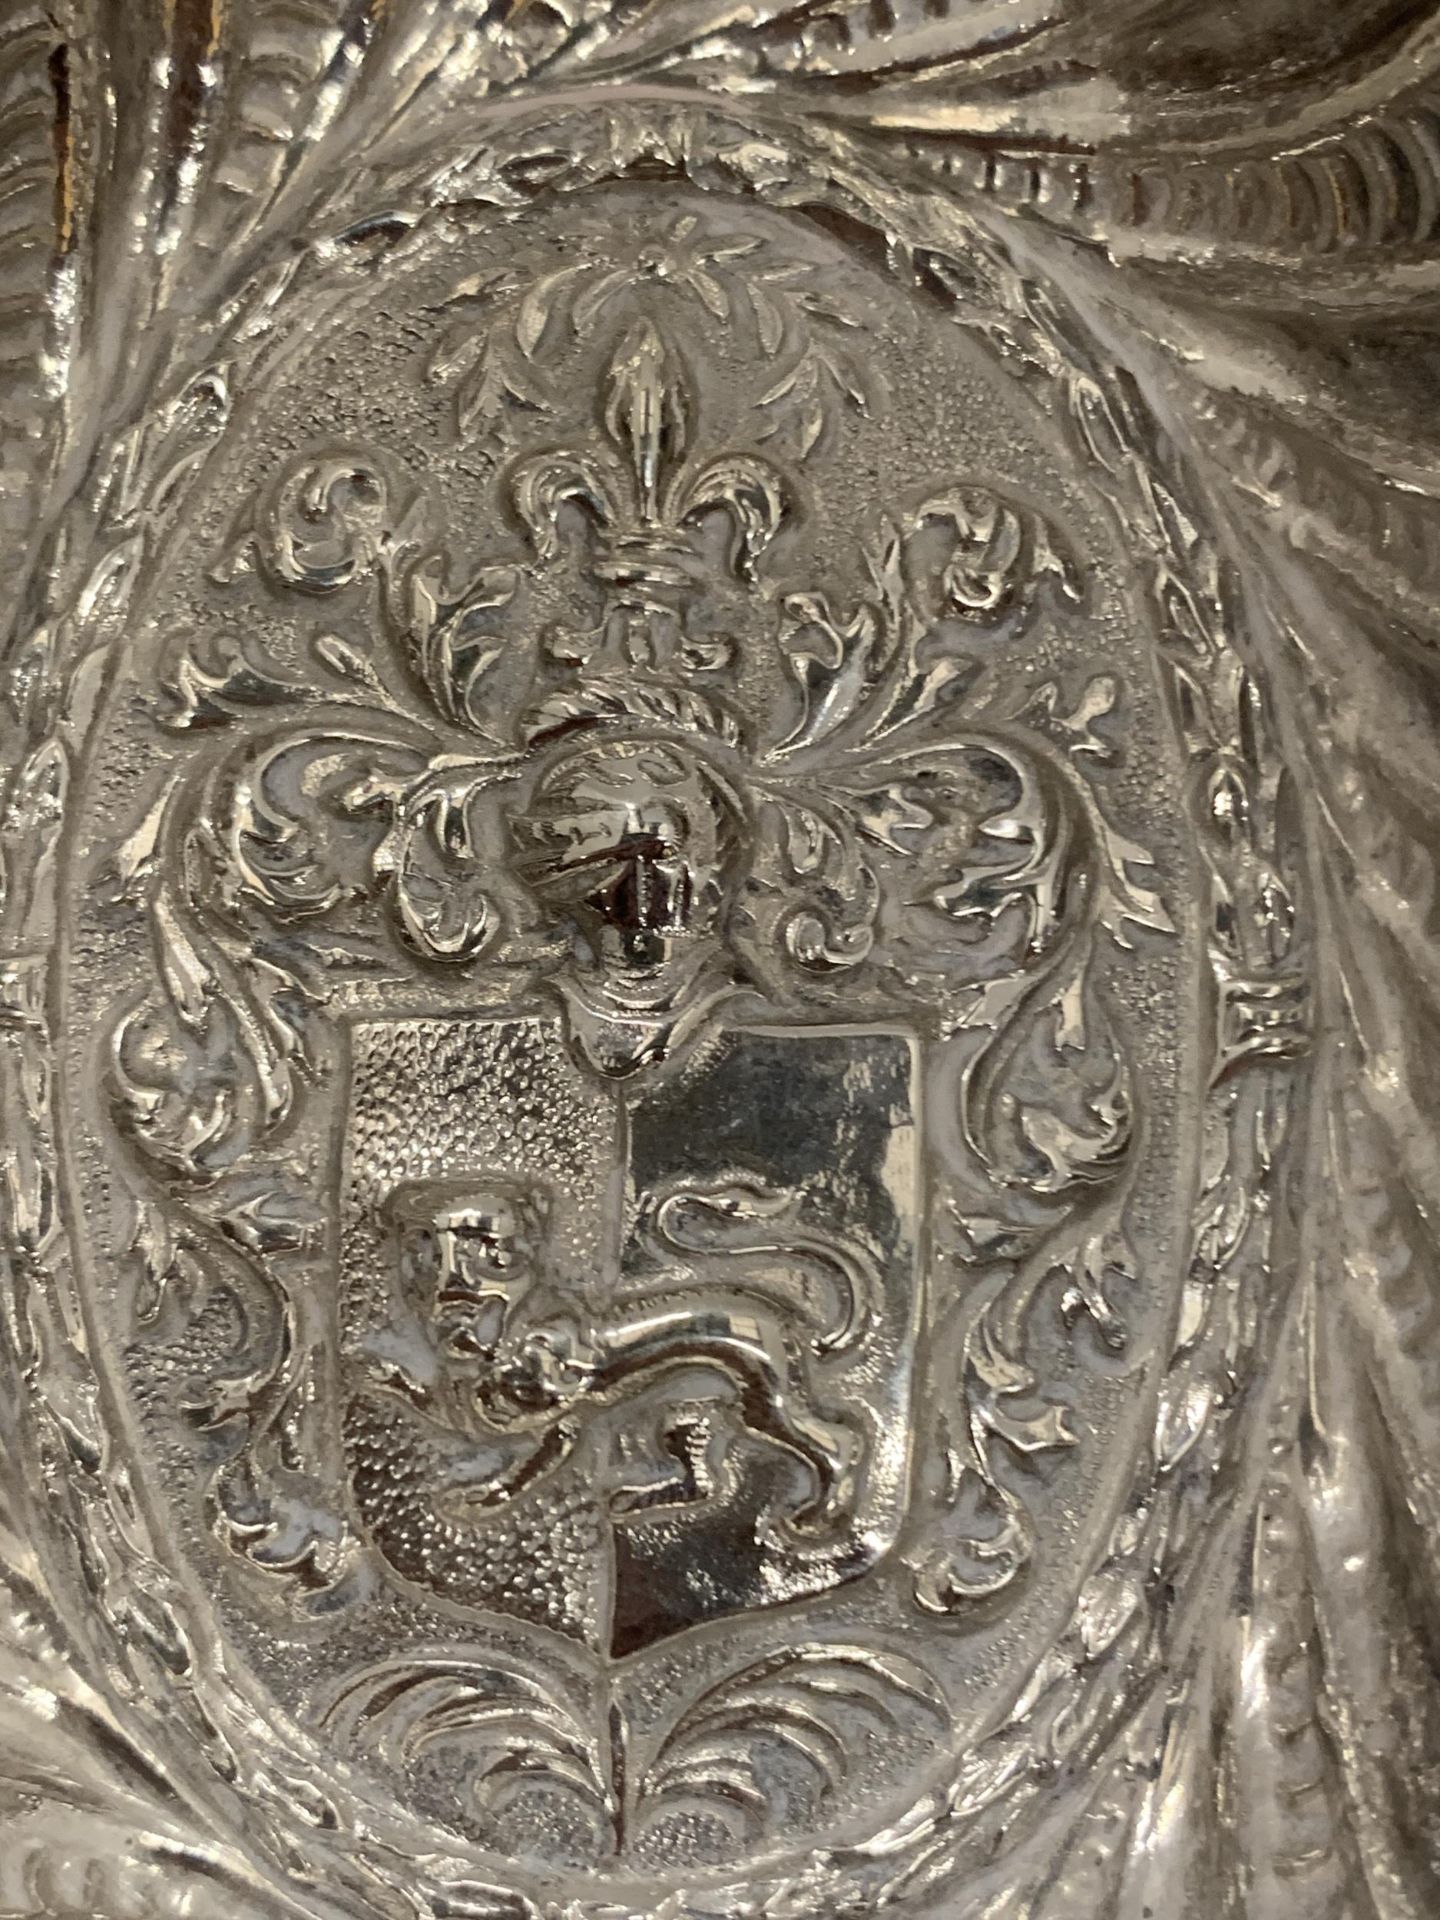 A TWIN HANDLED SILVER BOWL WITH COAT OF ARMS DESIGN - Image 3 of 4